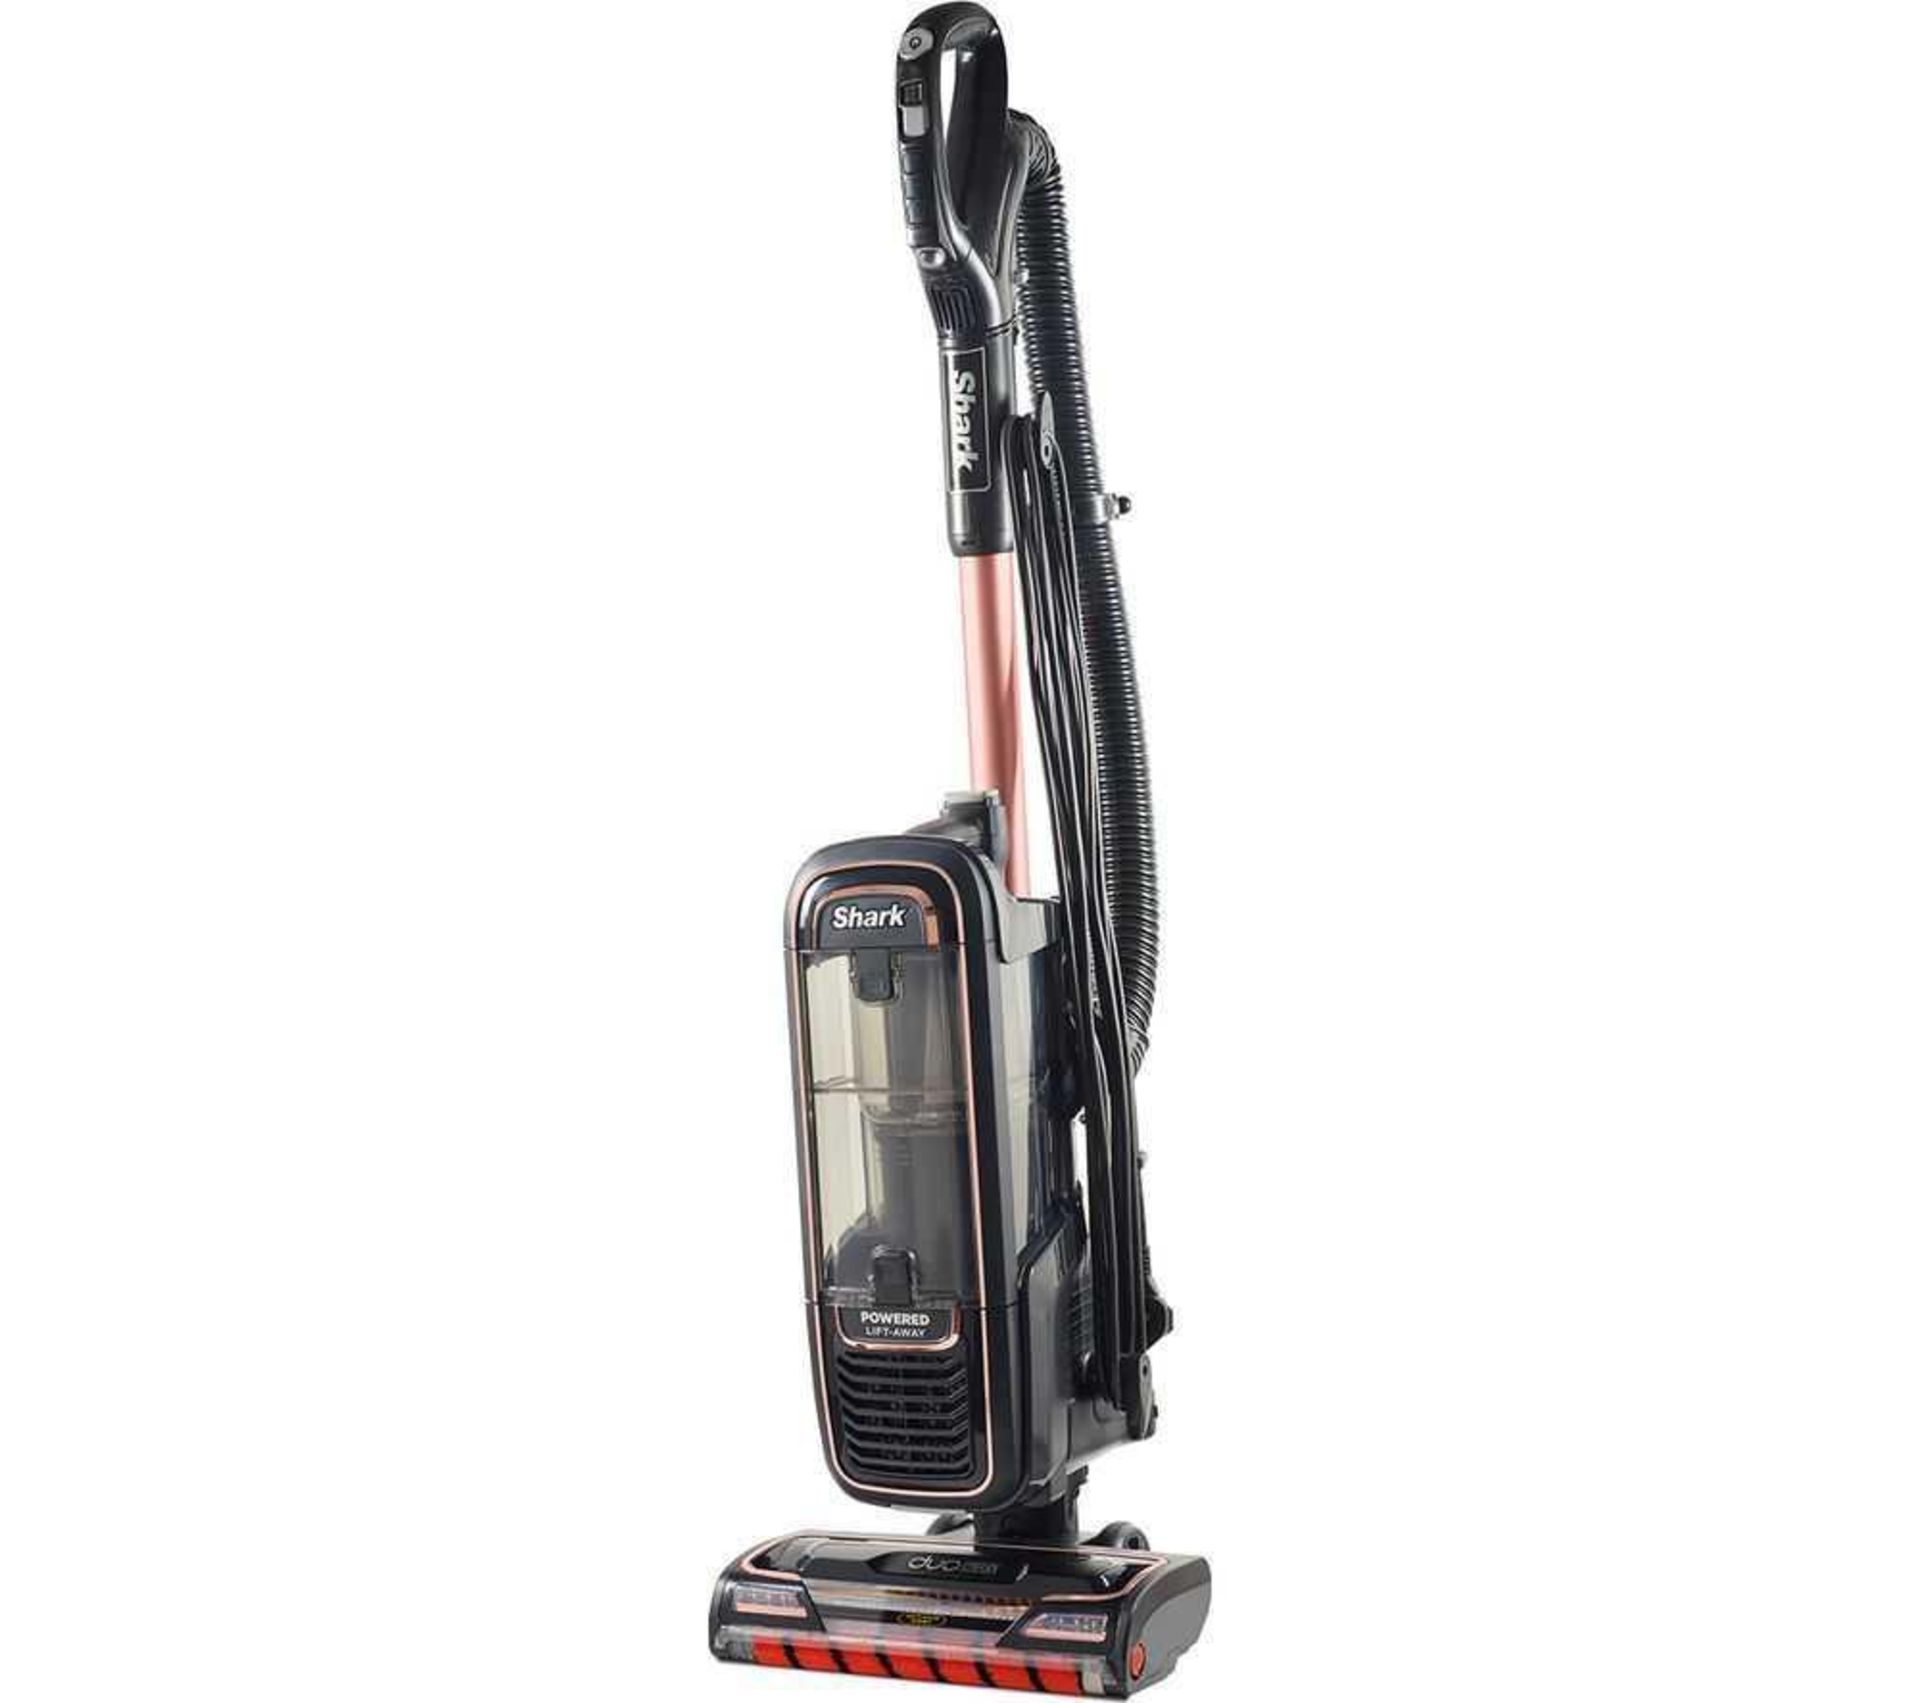 Rrp £400 Boxed Shark Corded Upright Vacuum With Anti-Hair Wrap Technology